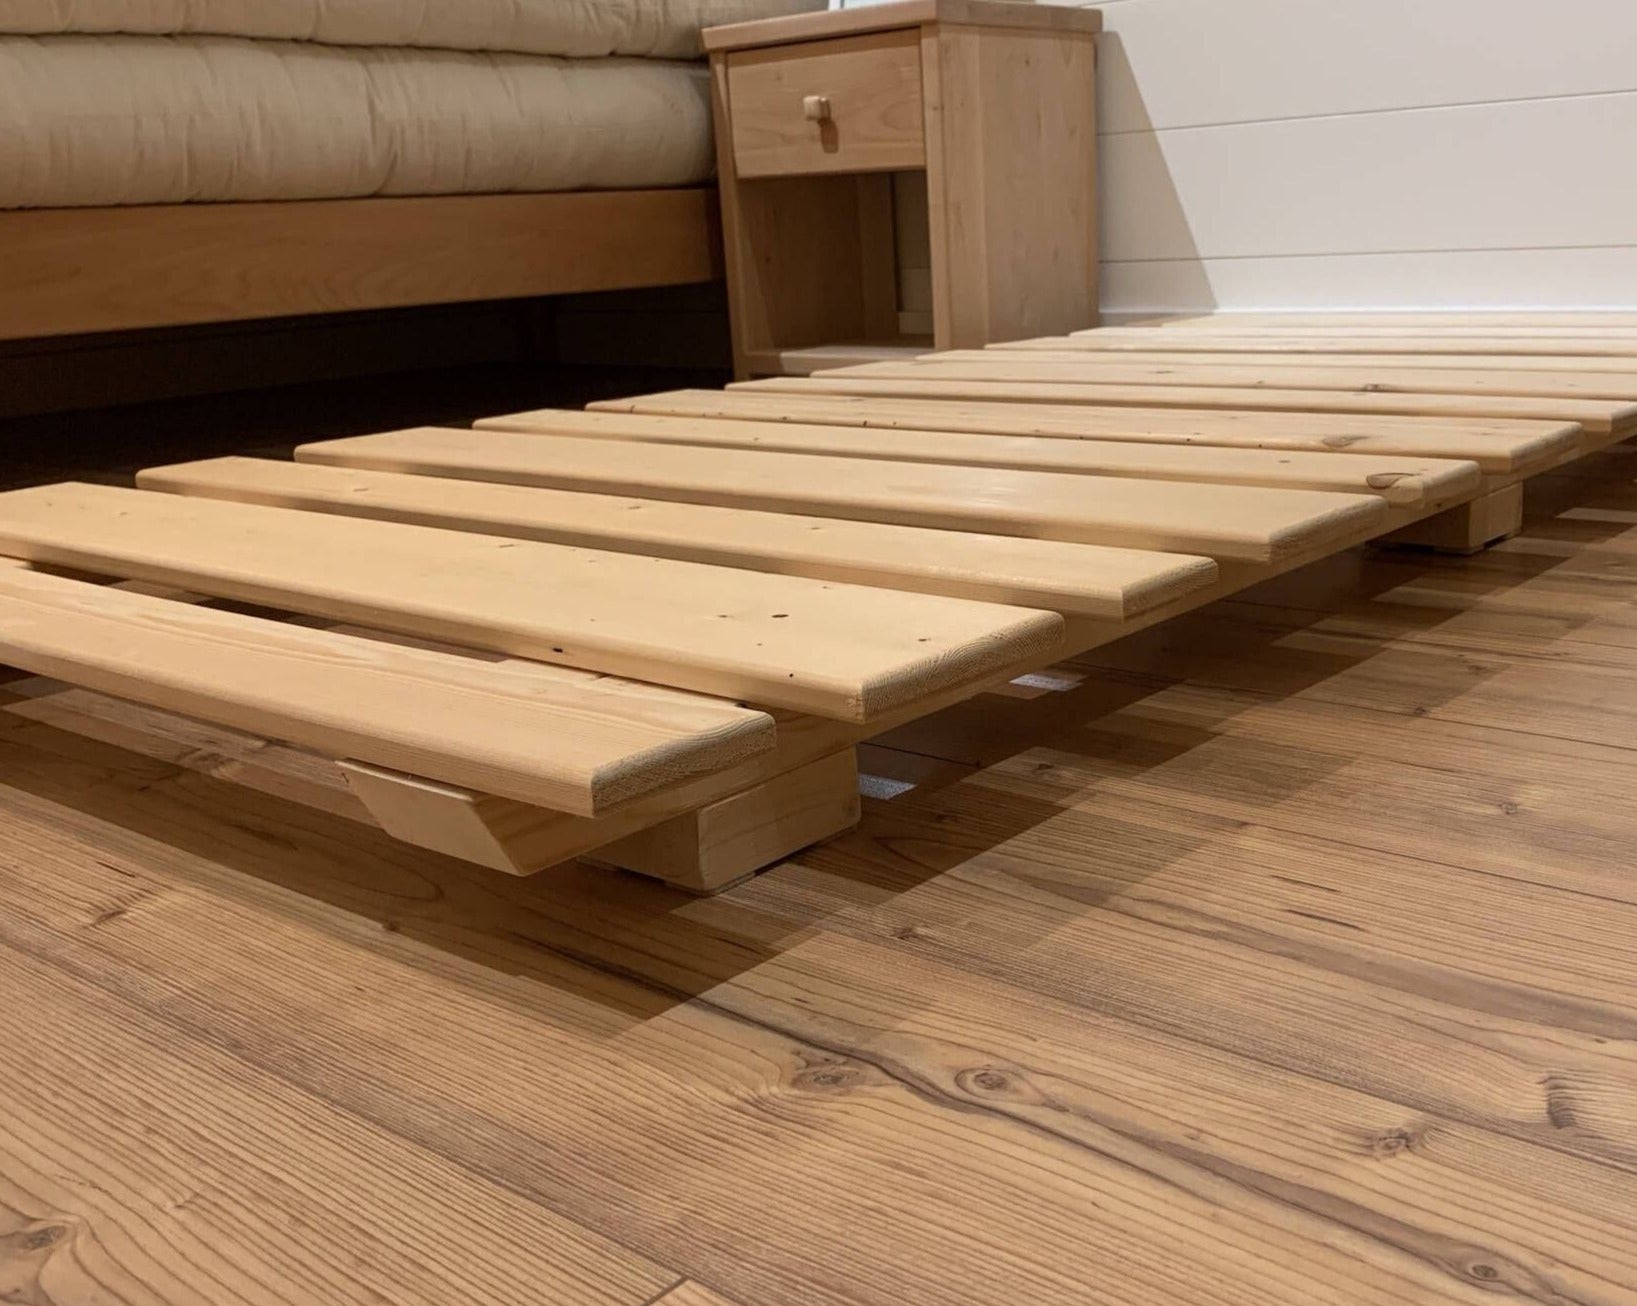 Magic Ultra Low Platform Bed Frame close to the floor